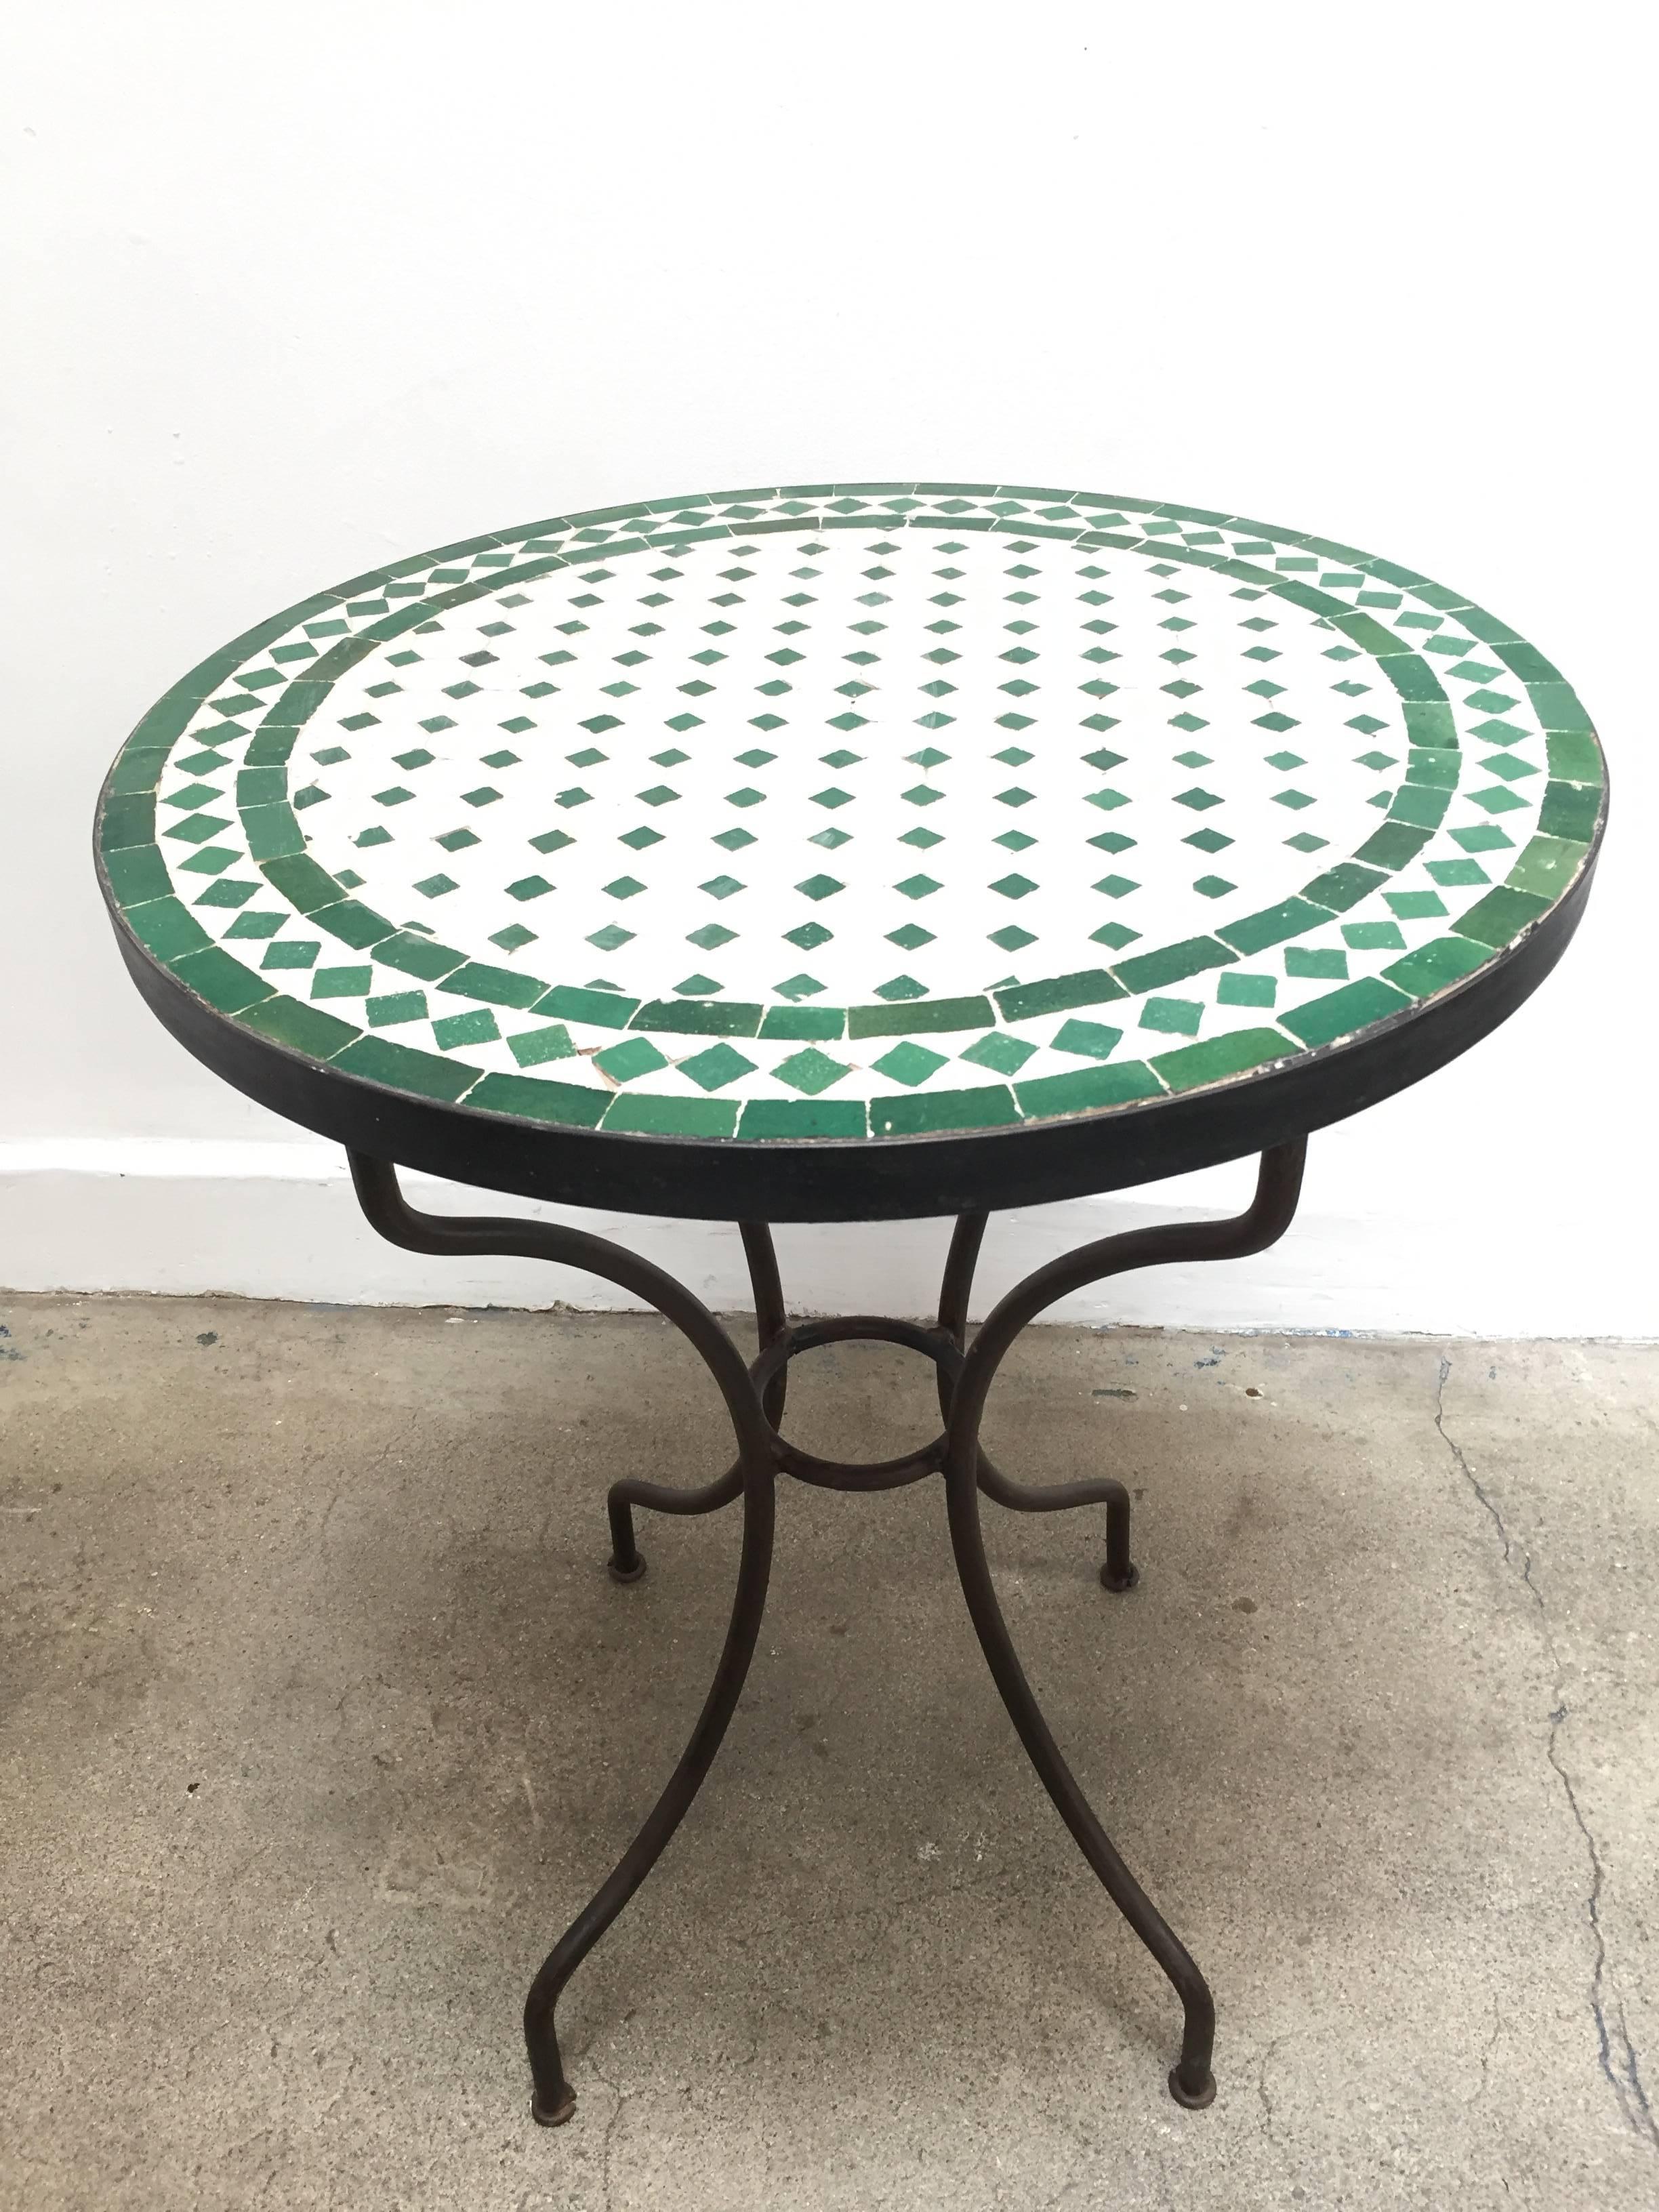 Moroccan mosaic tile bistro table on iron base. 
Handmade by expert artisans in Fez, Morocco using reclaimed old glazed tiles inlaid in concrete using reclaimed old glazed tiles and making beautiful geometrical designs, colors are green and white,